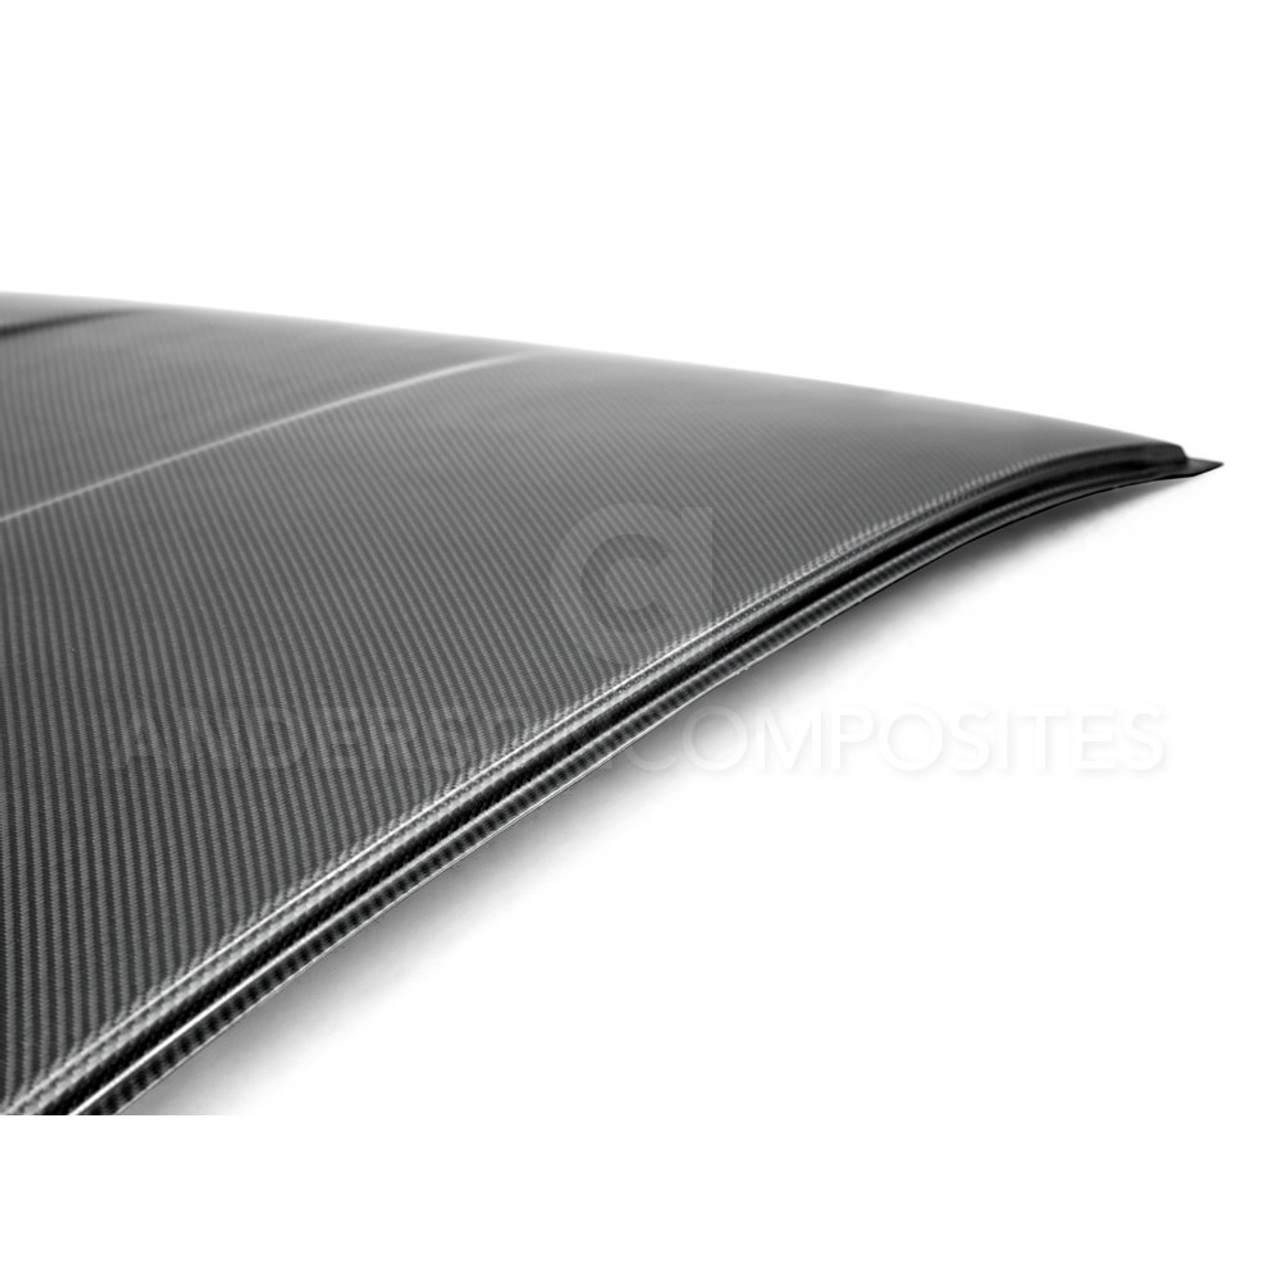 Anderson Composites 2010 - 2015 Camaro Dry Carbon Roof Replacement